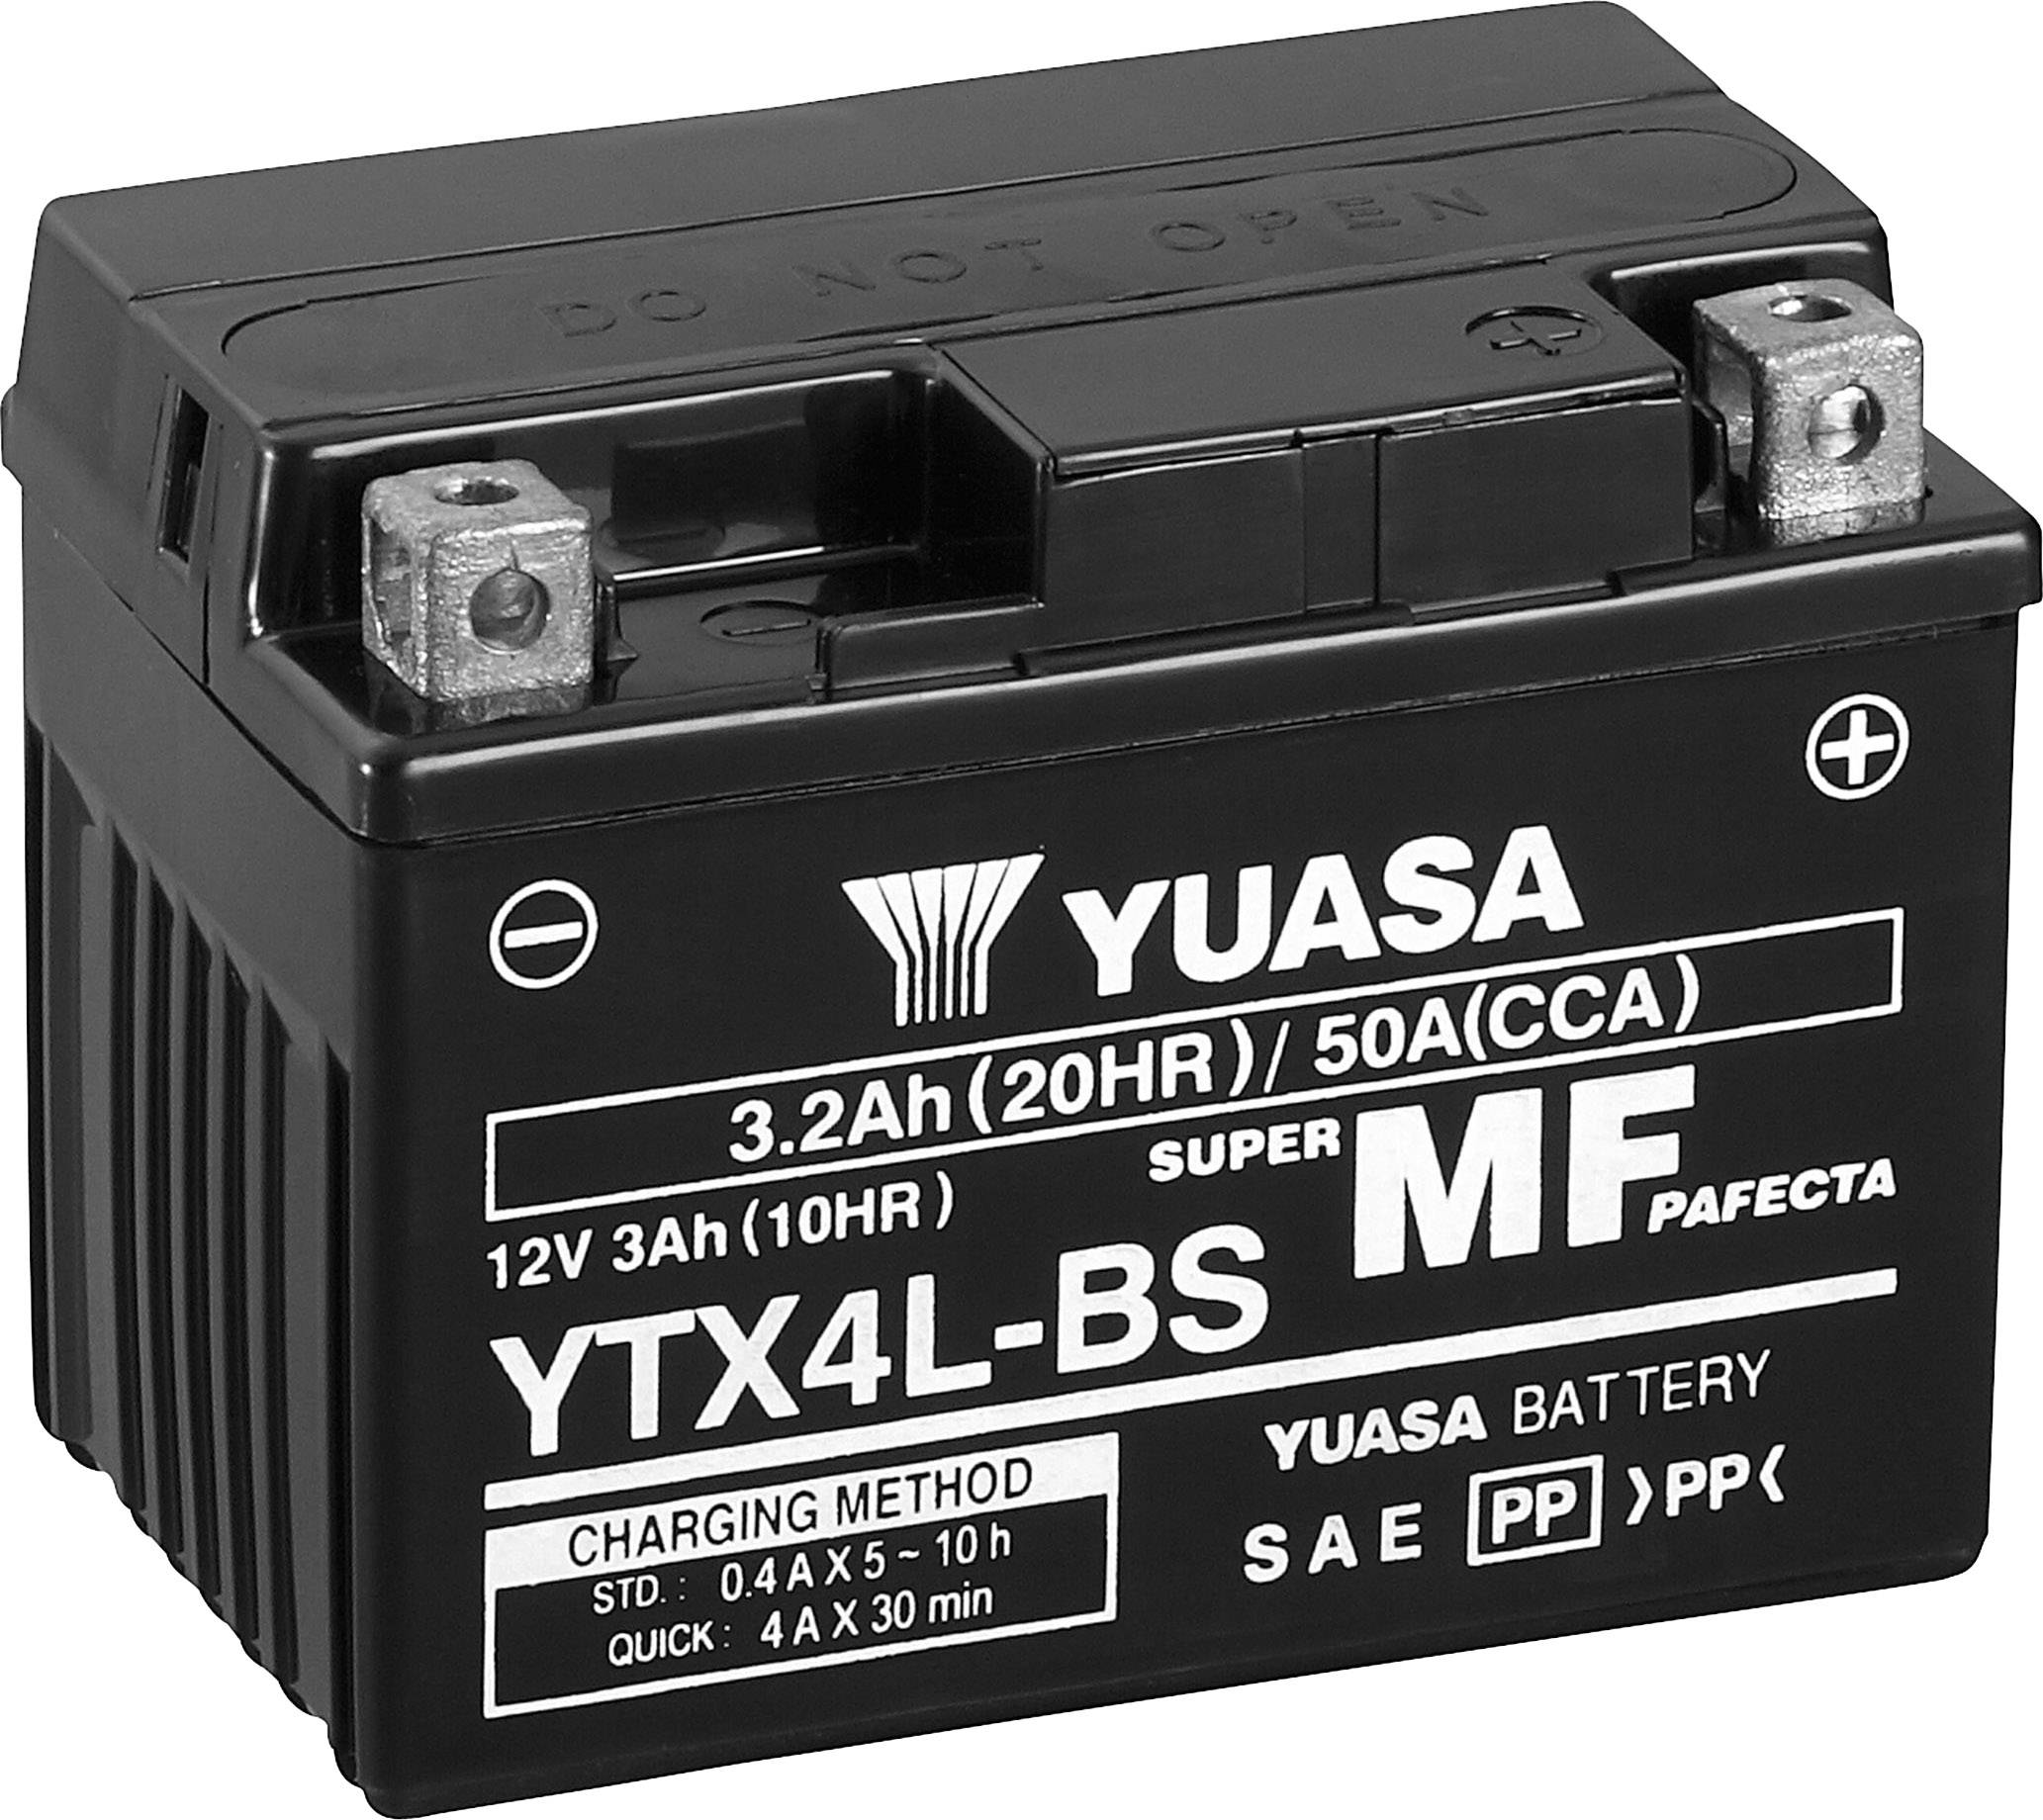 Mighty Max Battery YTX4L-BS 12V 3Ah Gel Battery Replacement for Yuasa YTX4L-BS Battery Brand Product 